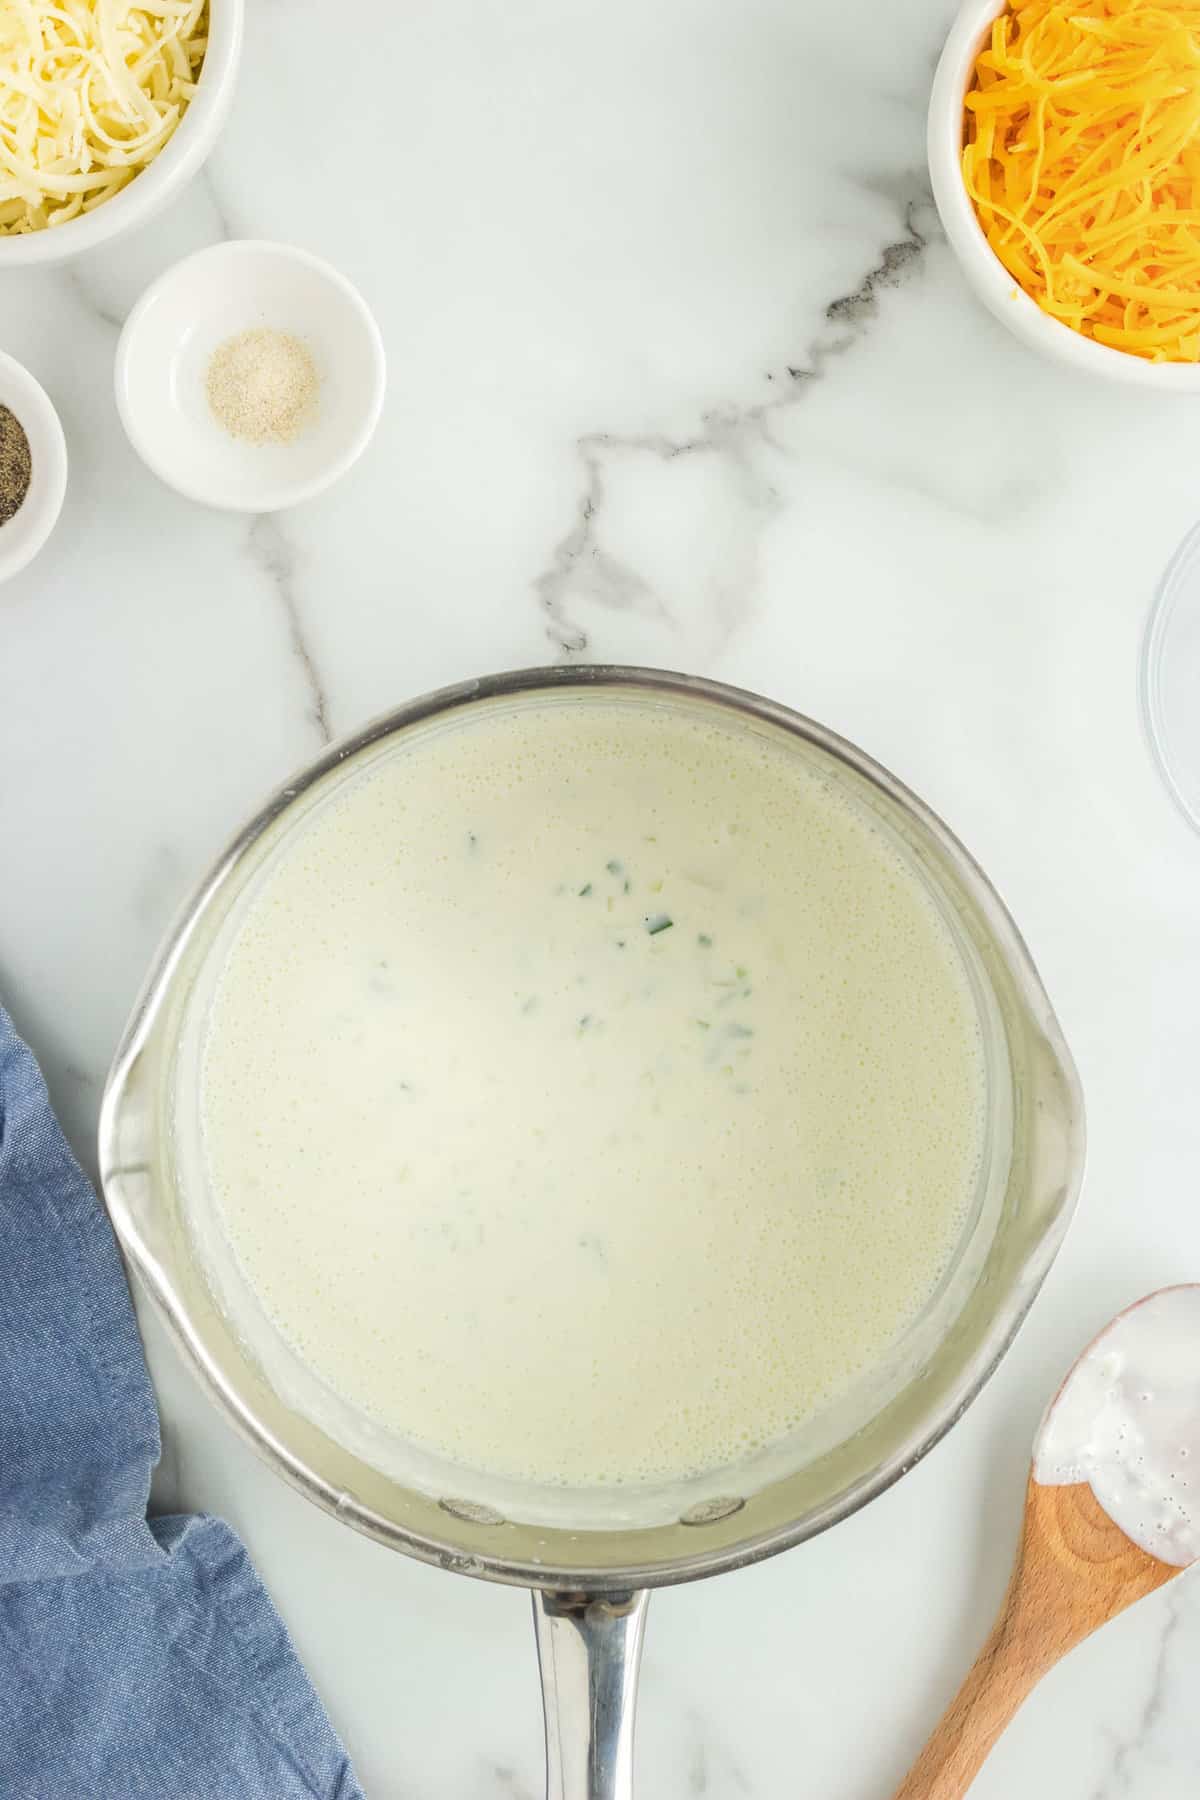 Butter, Onion, Jalepeno, and Creamed Blended Until Smooth in Saucepan for Homemade Queso Recipe